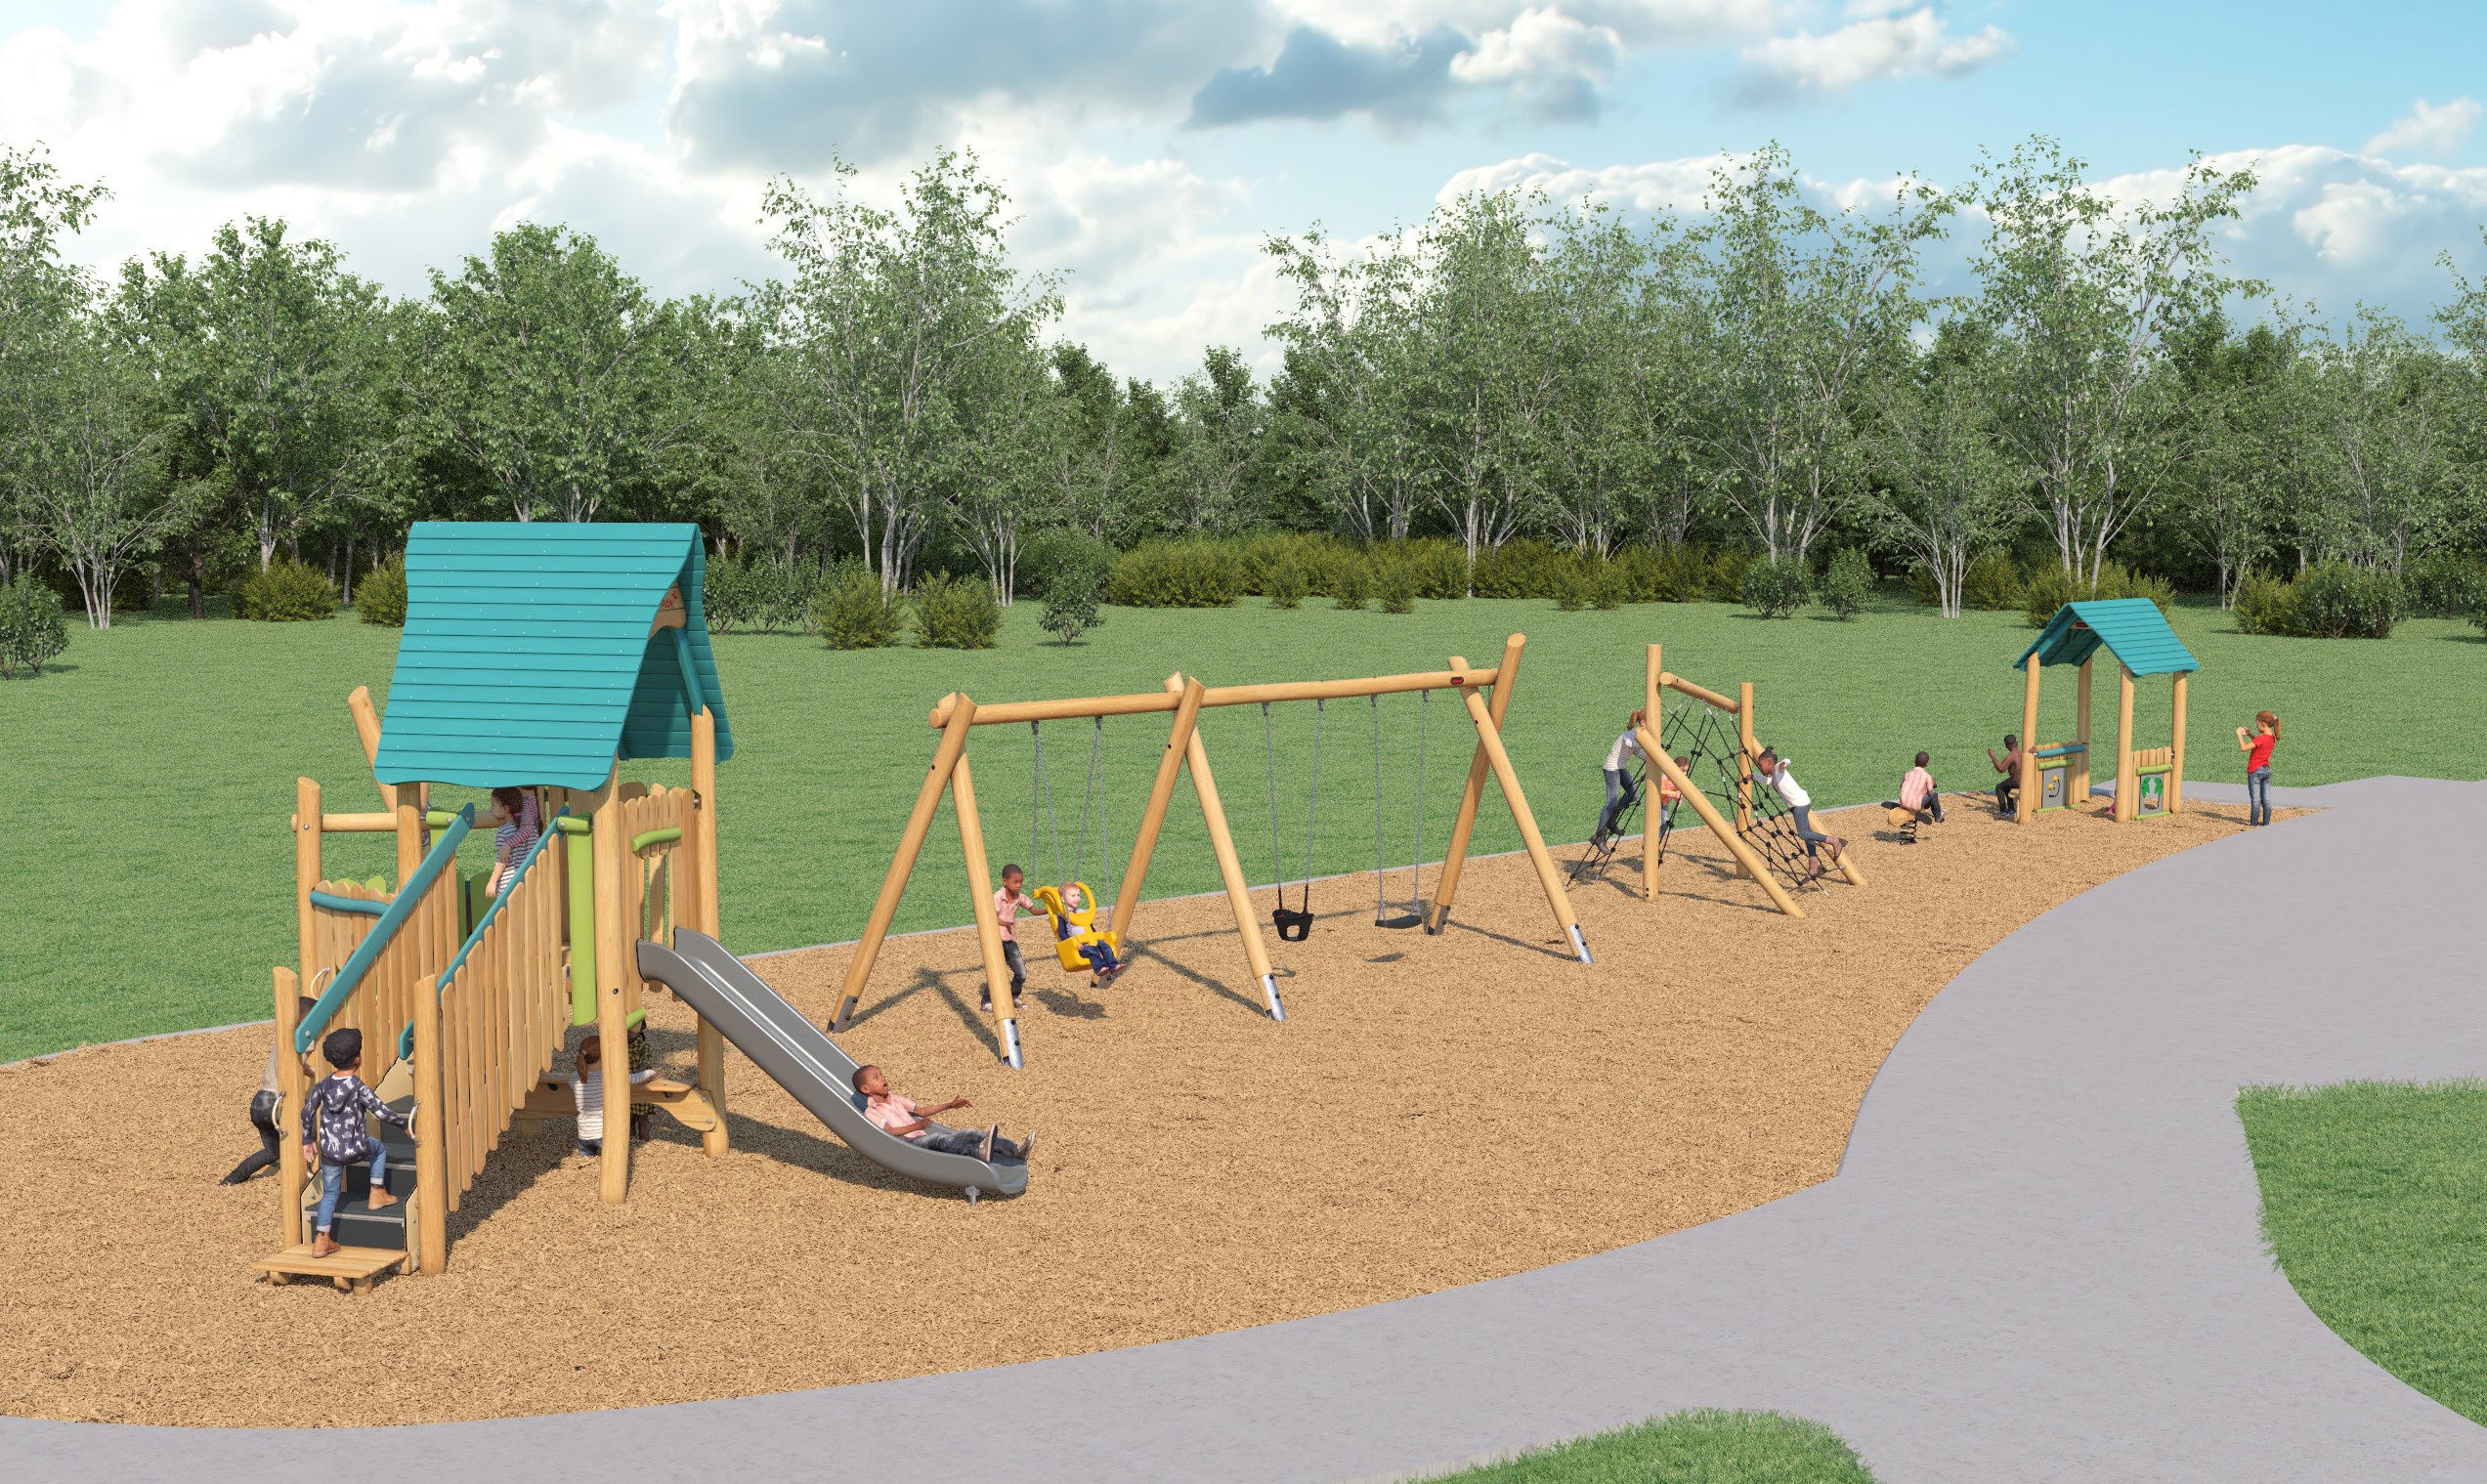 A rendering of the play area for the new park on Nairn Avenue, which includes a small wood play structure with a straight slide, a swing set with an accessible swing, bucket swing and belt swing, a rope climbing structure, a spring toy and a shade structure with play panels. The playground design has natural colours and materials like wood and blue. 